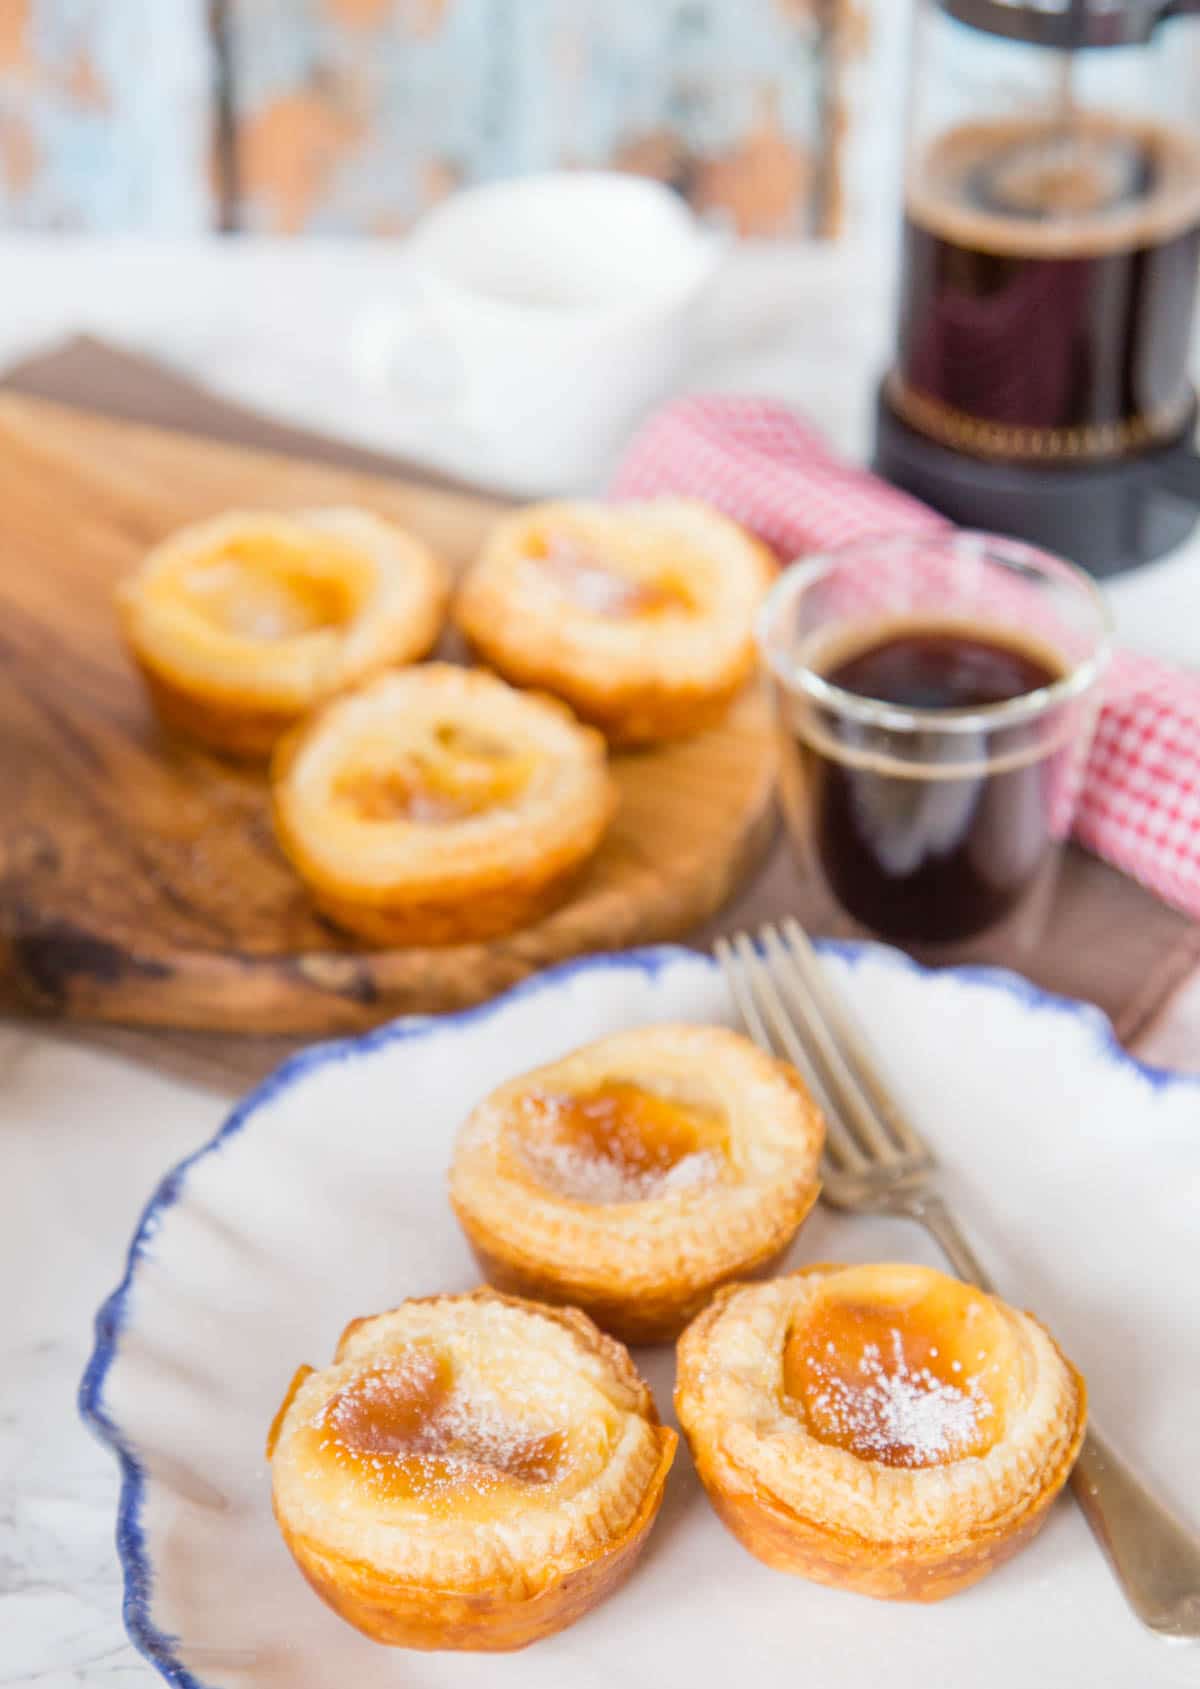 Serve your custard egg tarts with strong coffee for the authentic Portuguese experience!